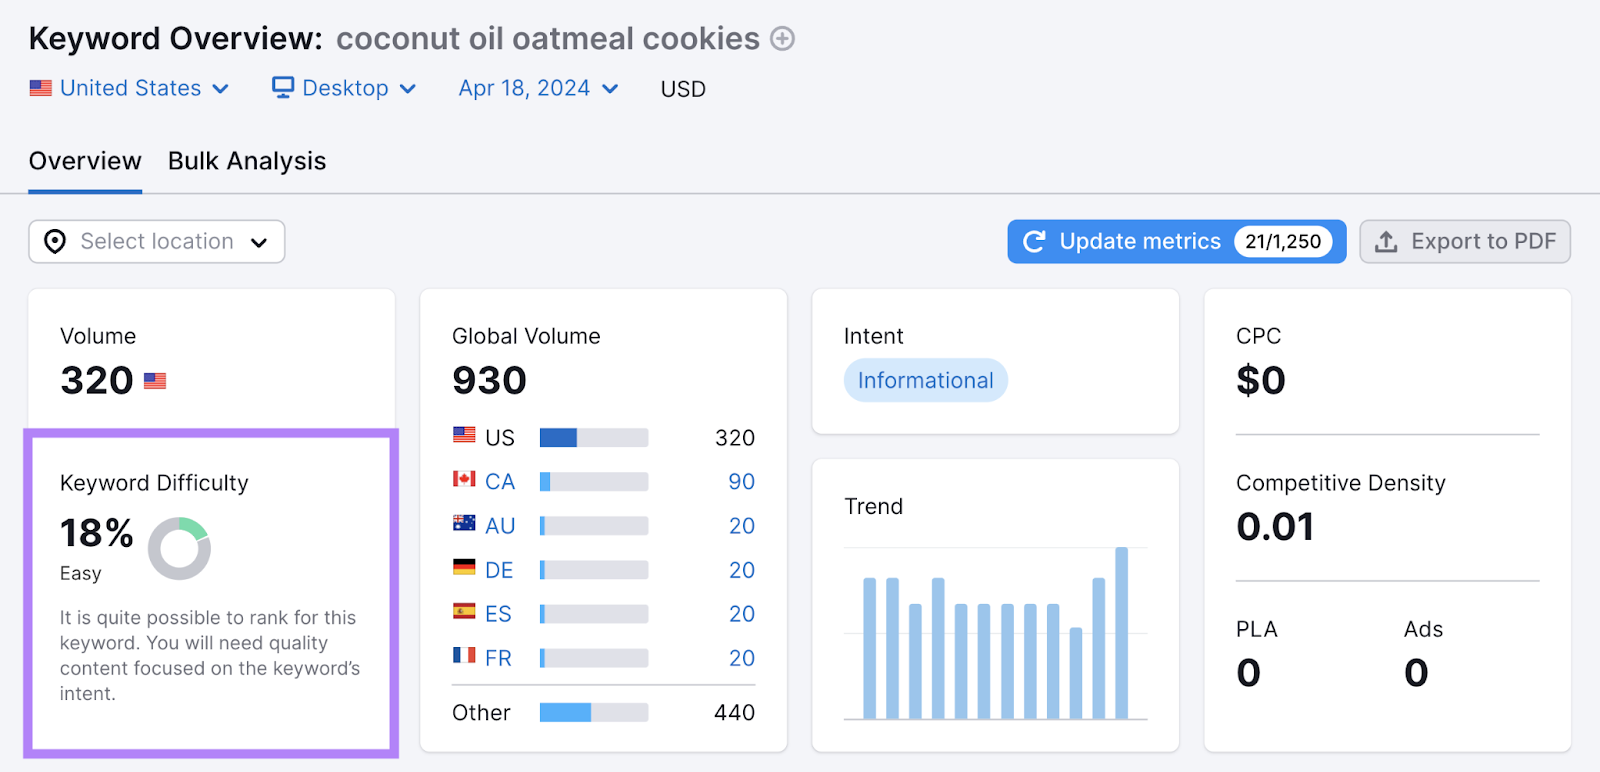 Search for "coconut lipid  oatmeal cookies" shows 18% keyword trouble  successful  Keyword Overview tool